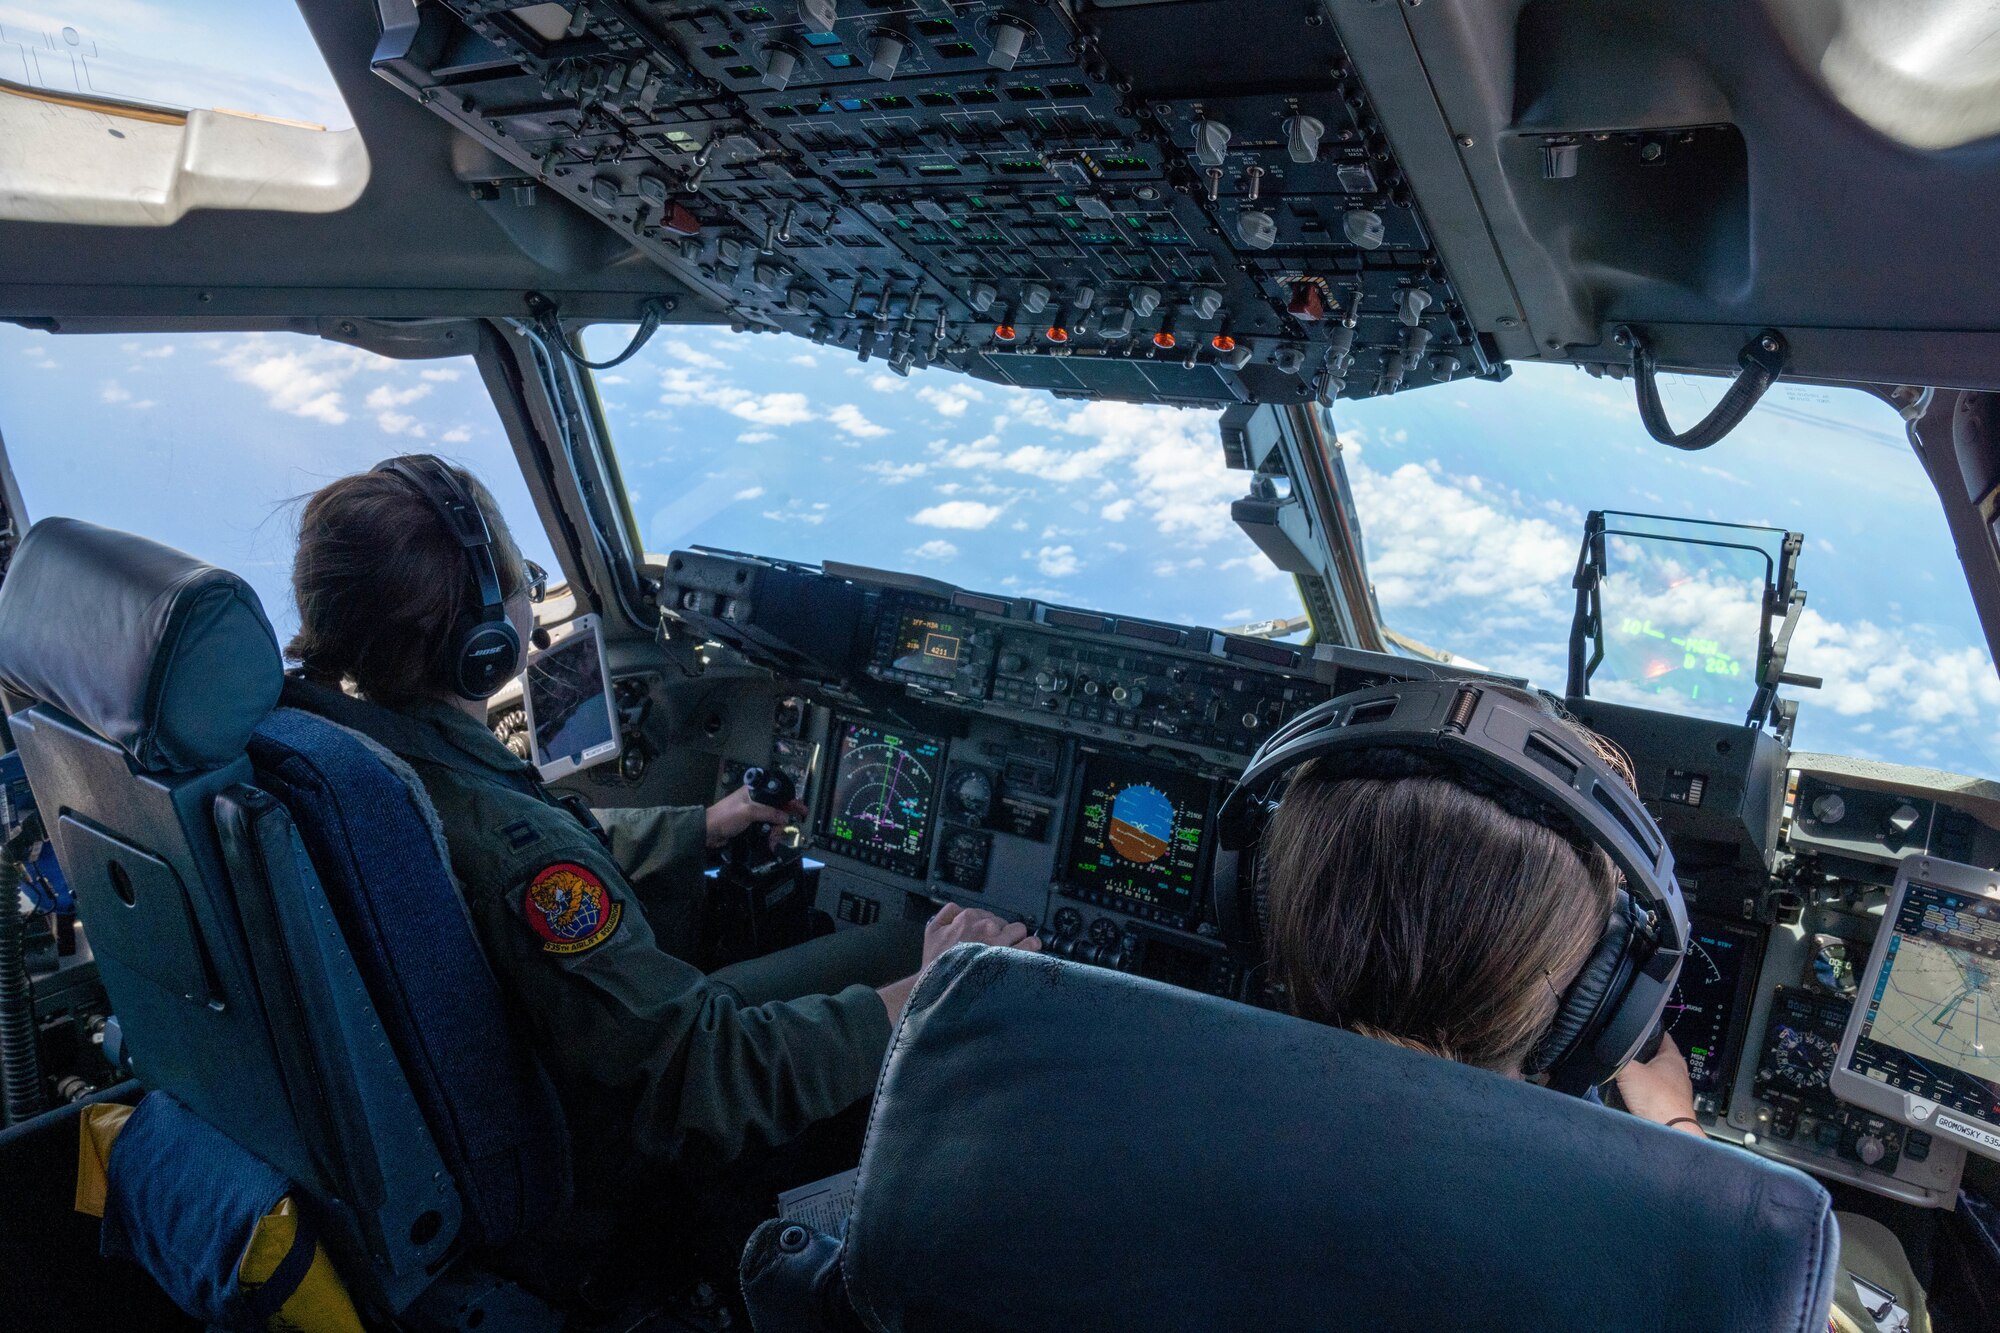 Capt. Nichole McCarthy and Maj. Abby Gromowsky, 535th Airlift Squadron pilots, complete a training mission during a Women’s History Month flight at Joint Base Pearl Harbor-Hickam, Hawaii, March 23, 2022. Women first entered pilot training in 1976 and currently make up 21 percent of the Air Force. (U.S. Air Force photo by Airman 1st Class Makensie Cooper)